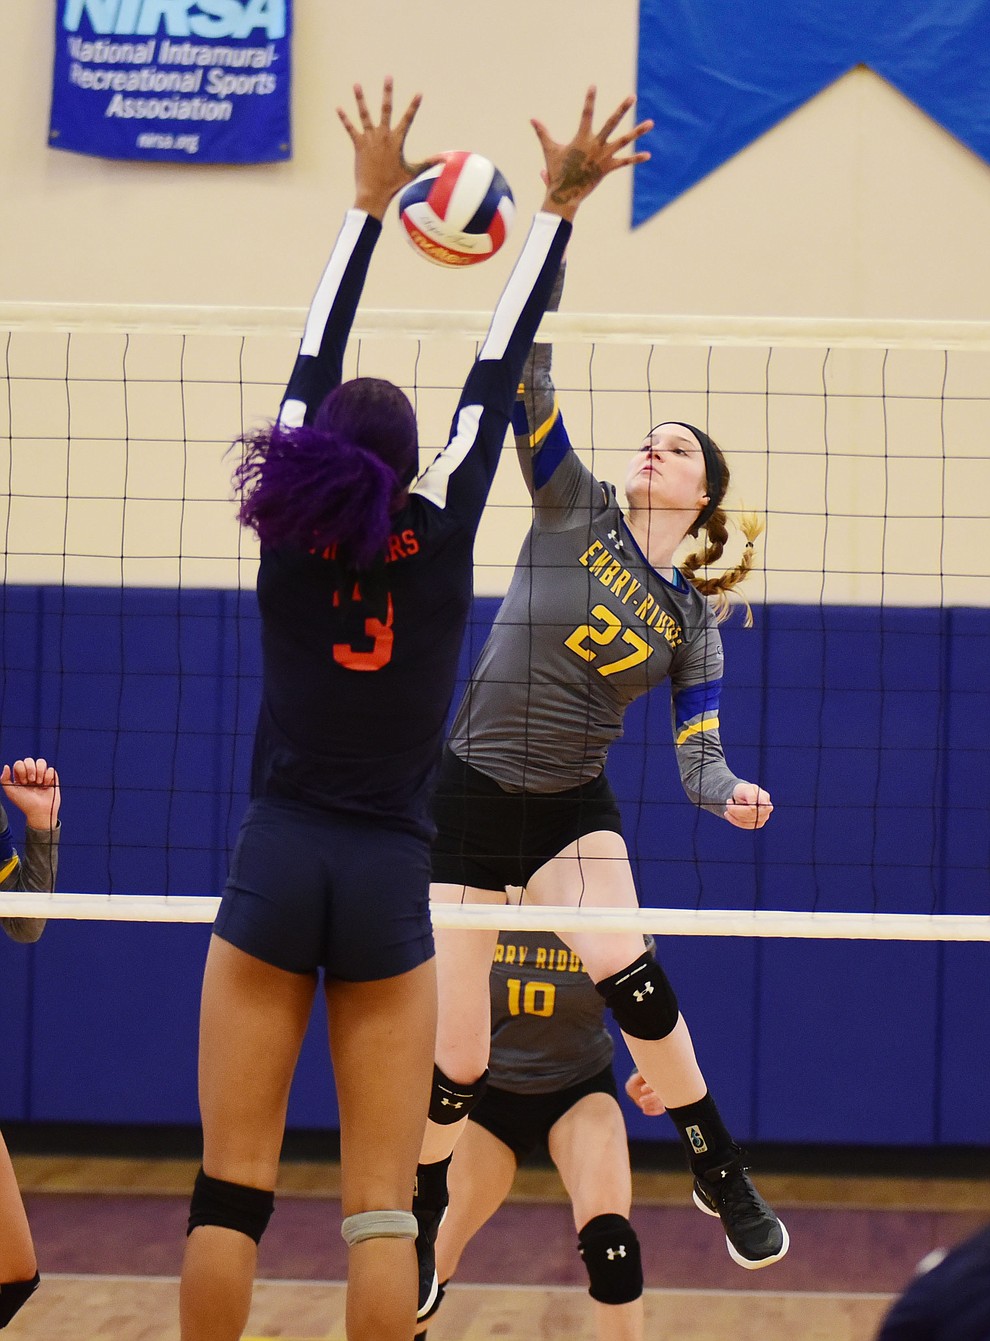 Embry Riddle's Veronica Norkus gets a kill through a blocker as the Eagles take on the University of Antelope Valley Pioneers  in a Cal Pac matchup Saturday, Sept. 29, 2018 in Prescott. (Les Stukenberg/Courier)